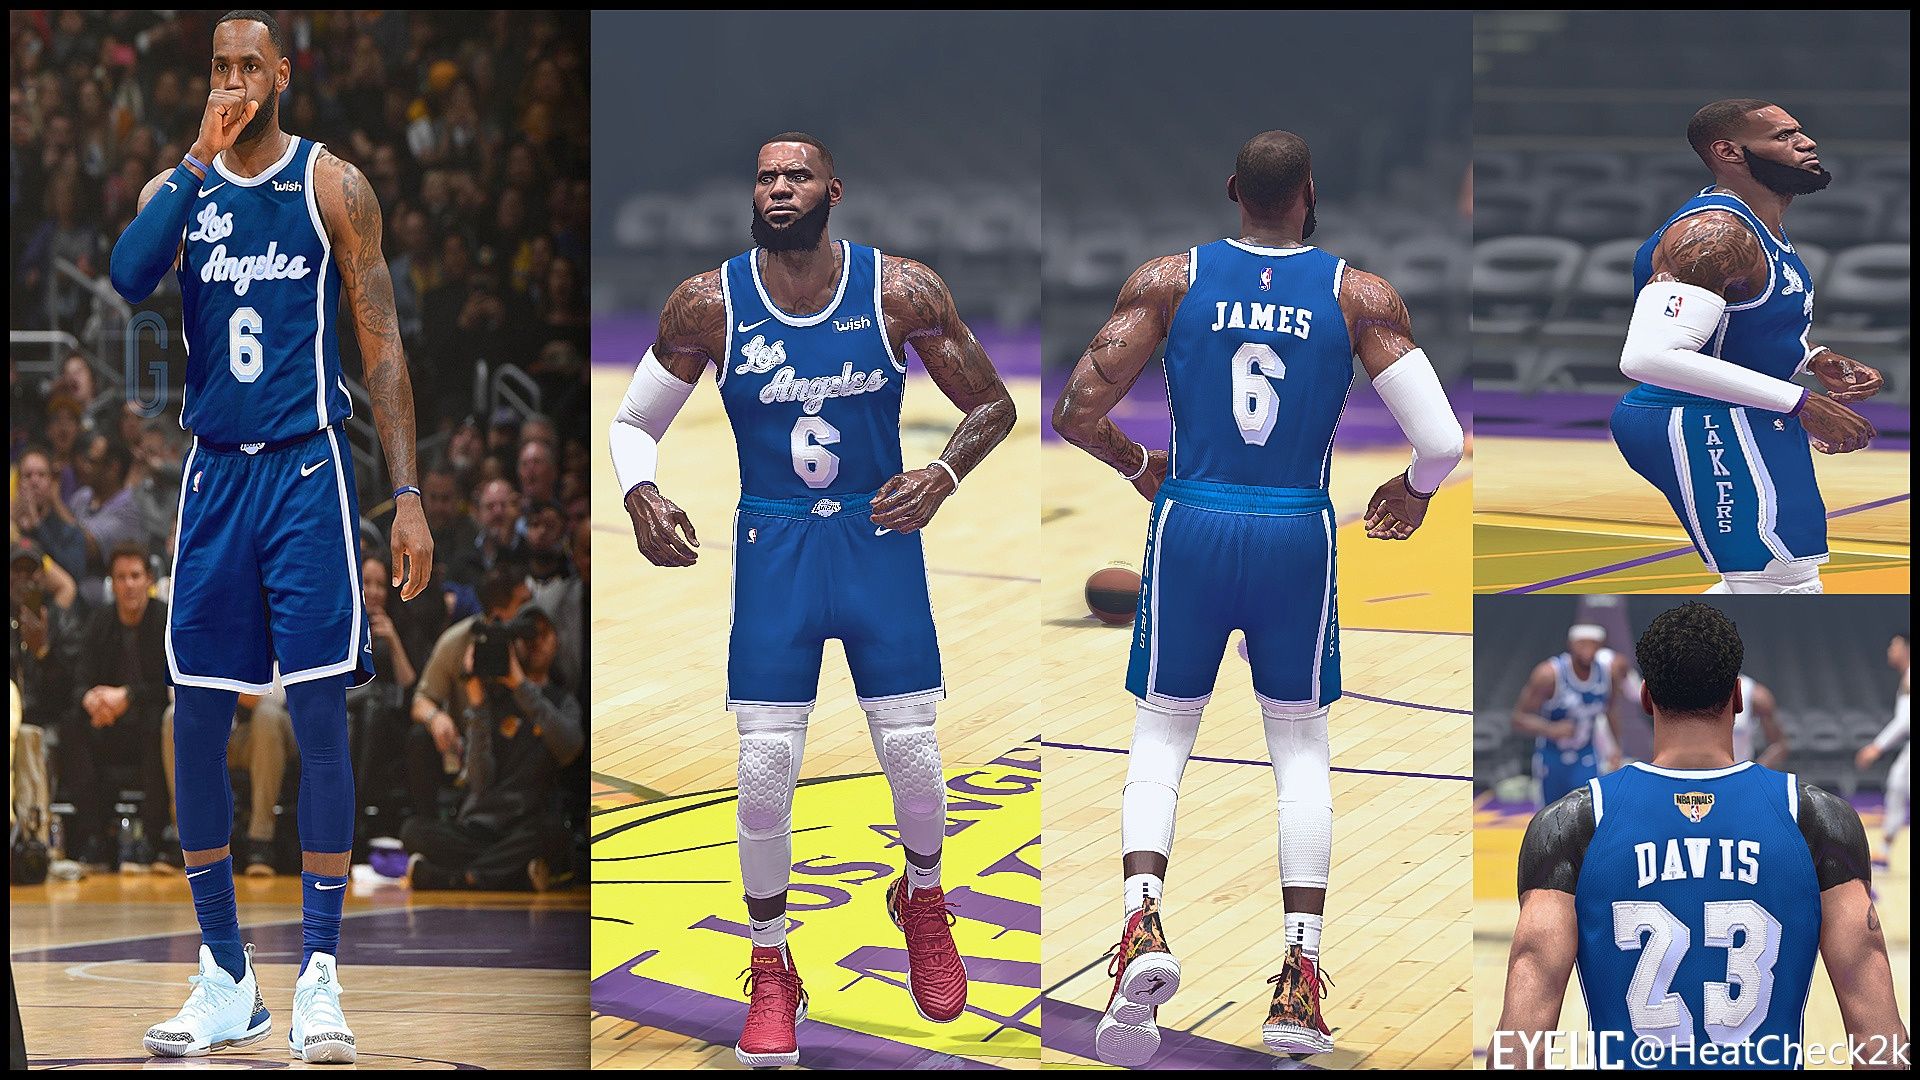 lakers home and away jerseys